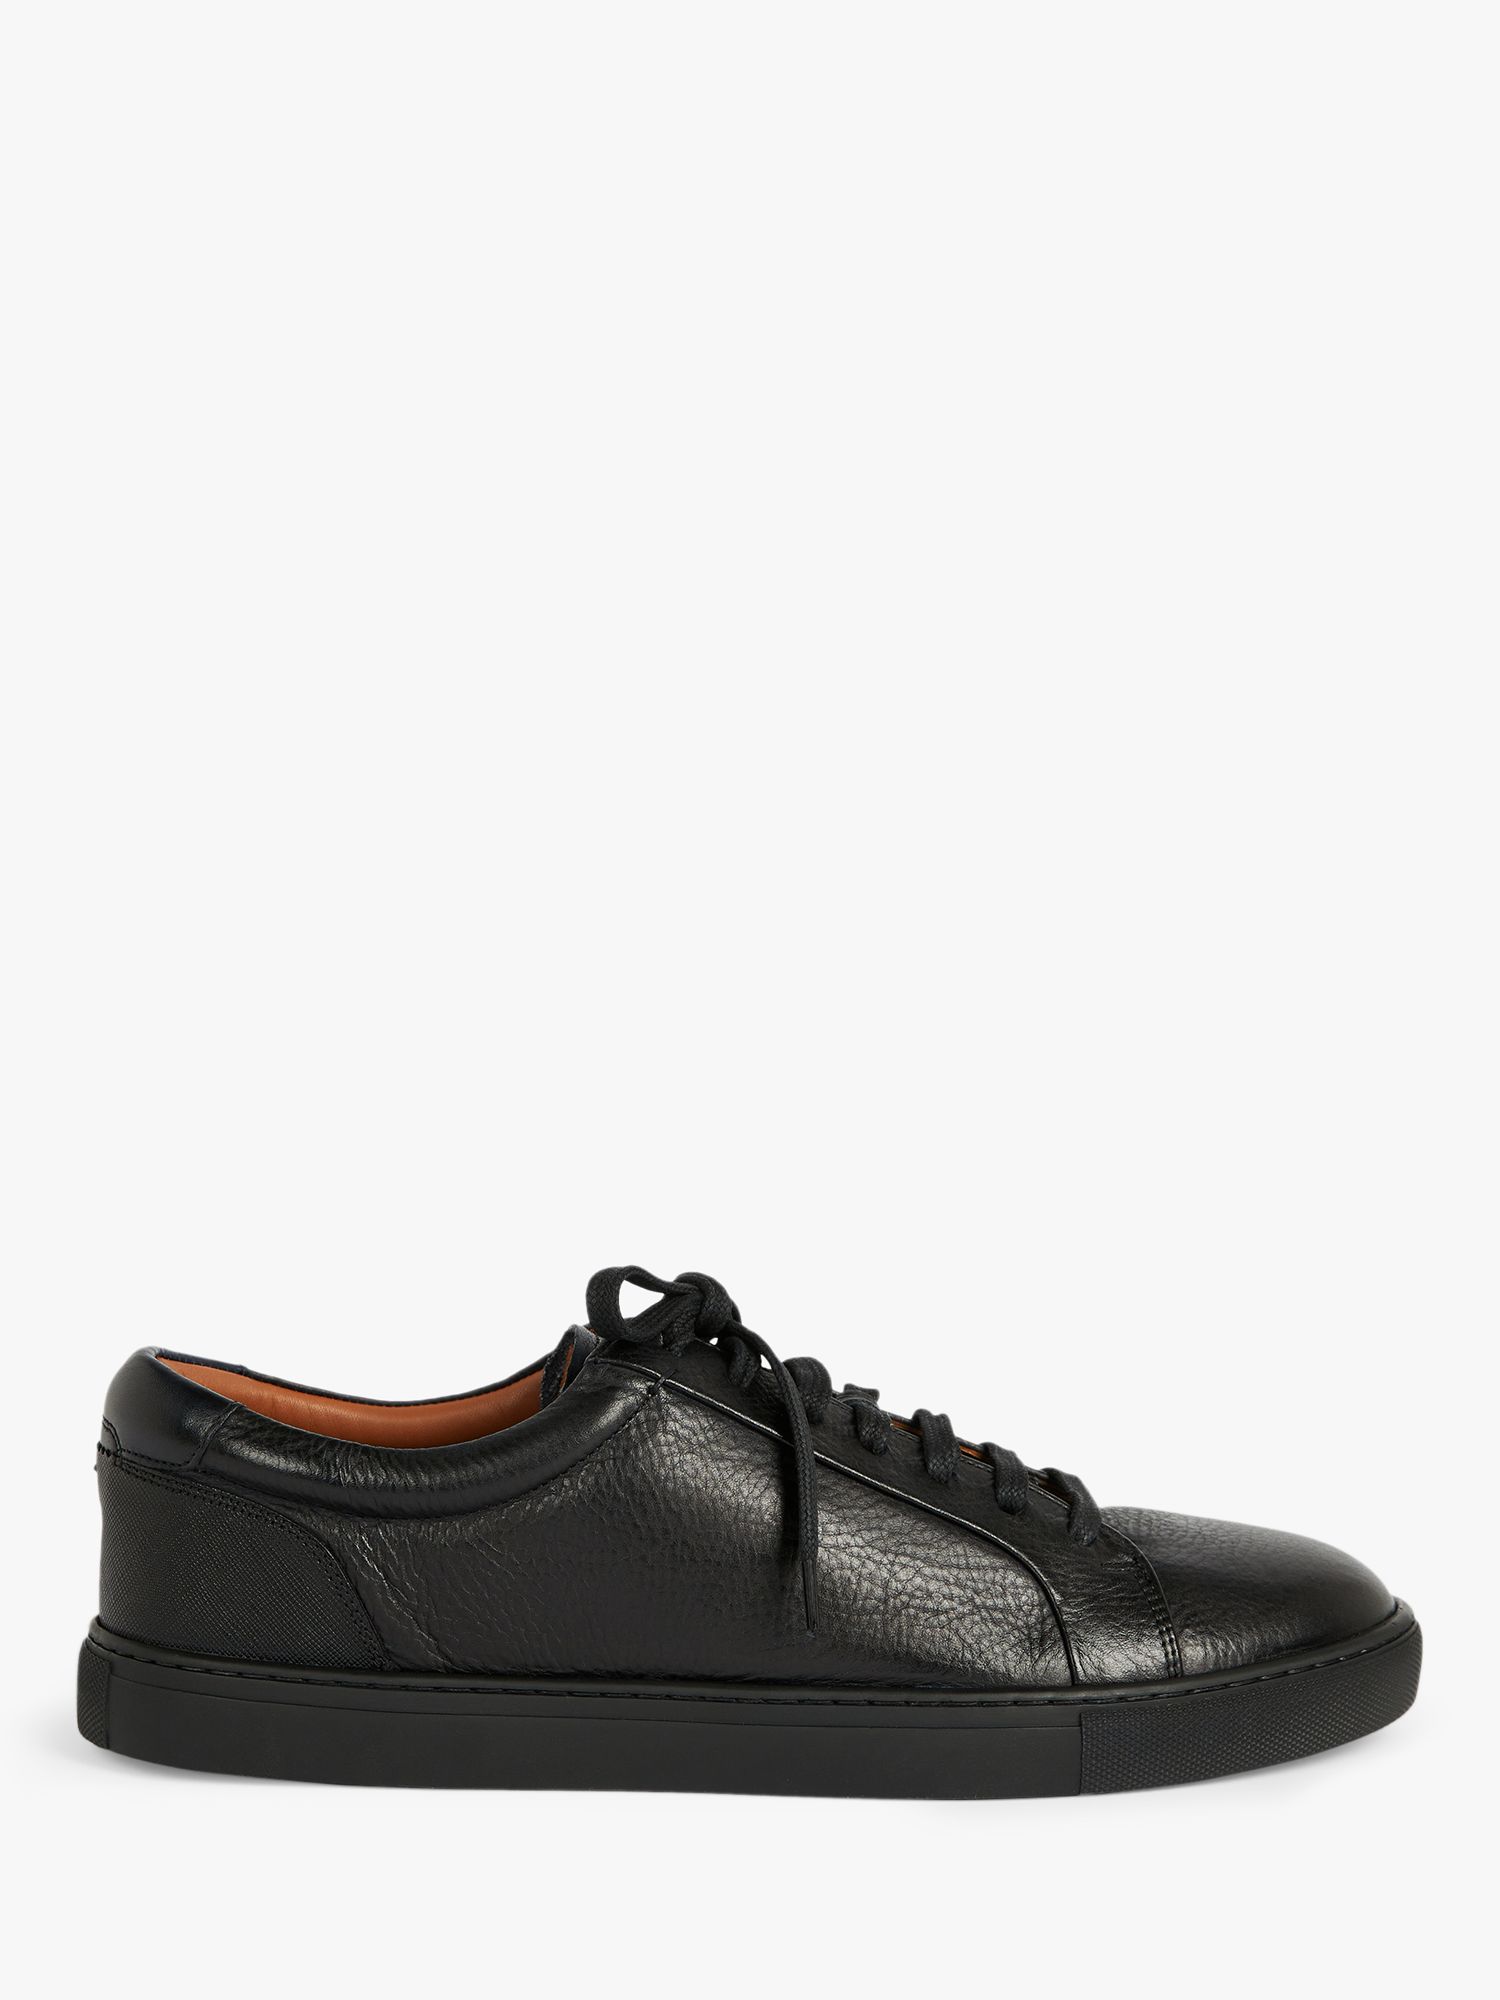 Ted Baker Udamo Leather Trainers, Black at John Lewis & Partners